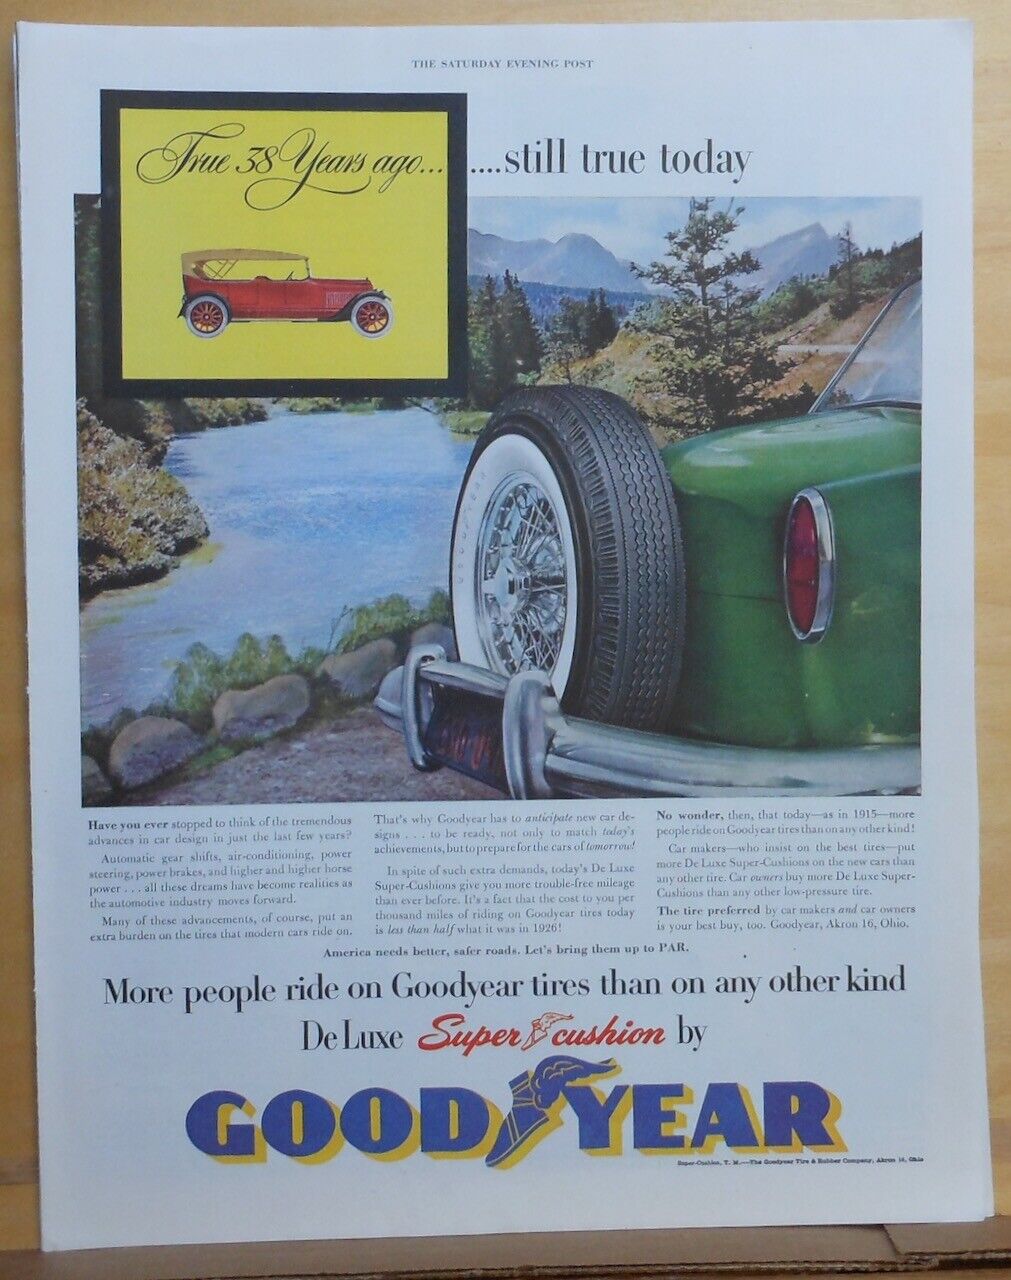 1953 magazine ad for GoodyearTires - True 38 years ago, still true today